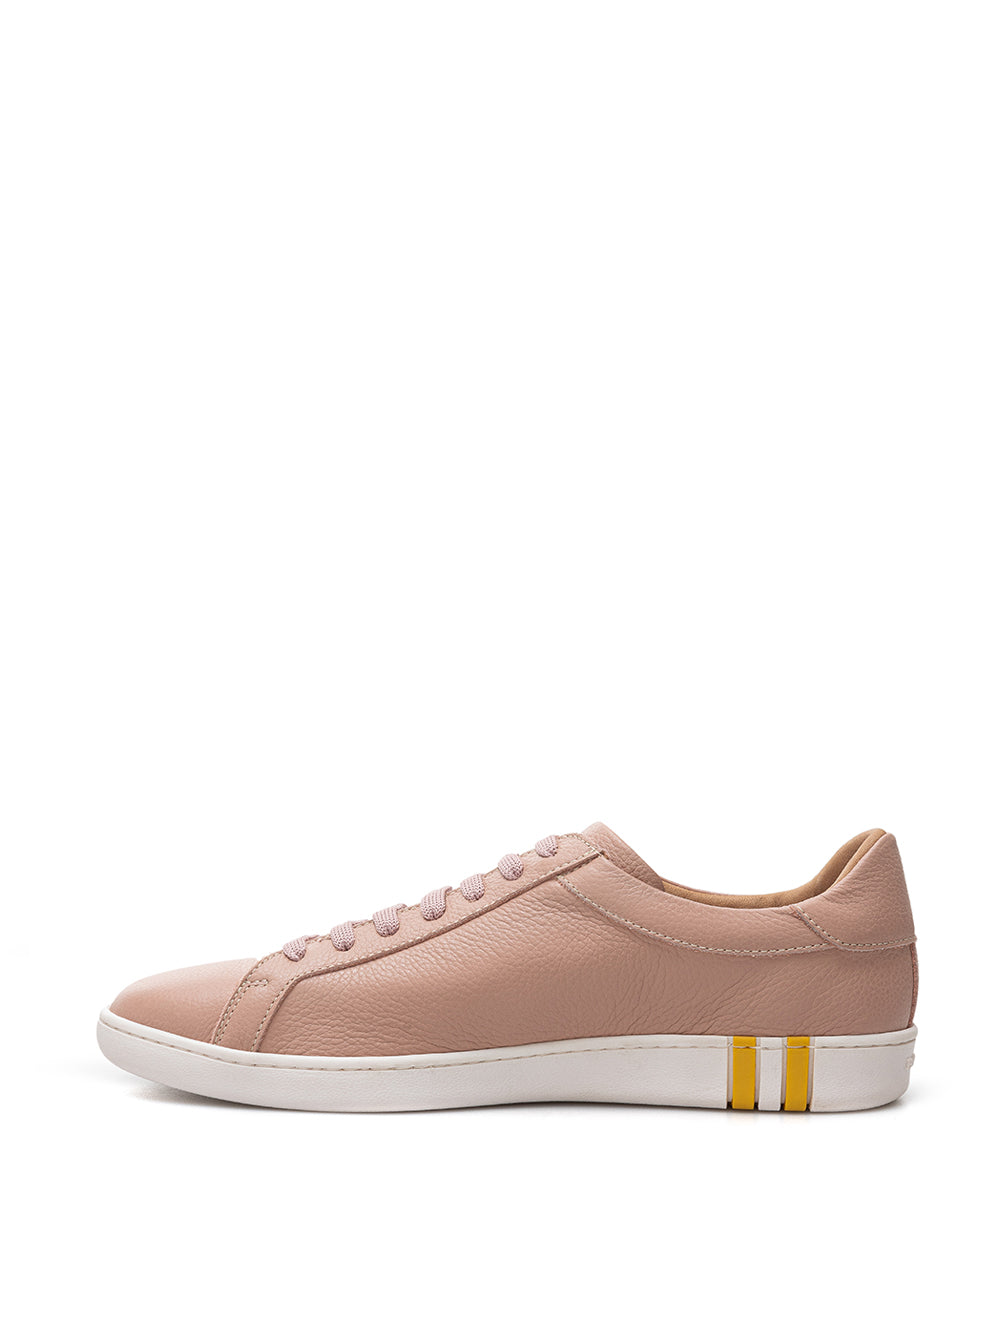 Bally Chic Pink Leather Lace-Up Sneakers